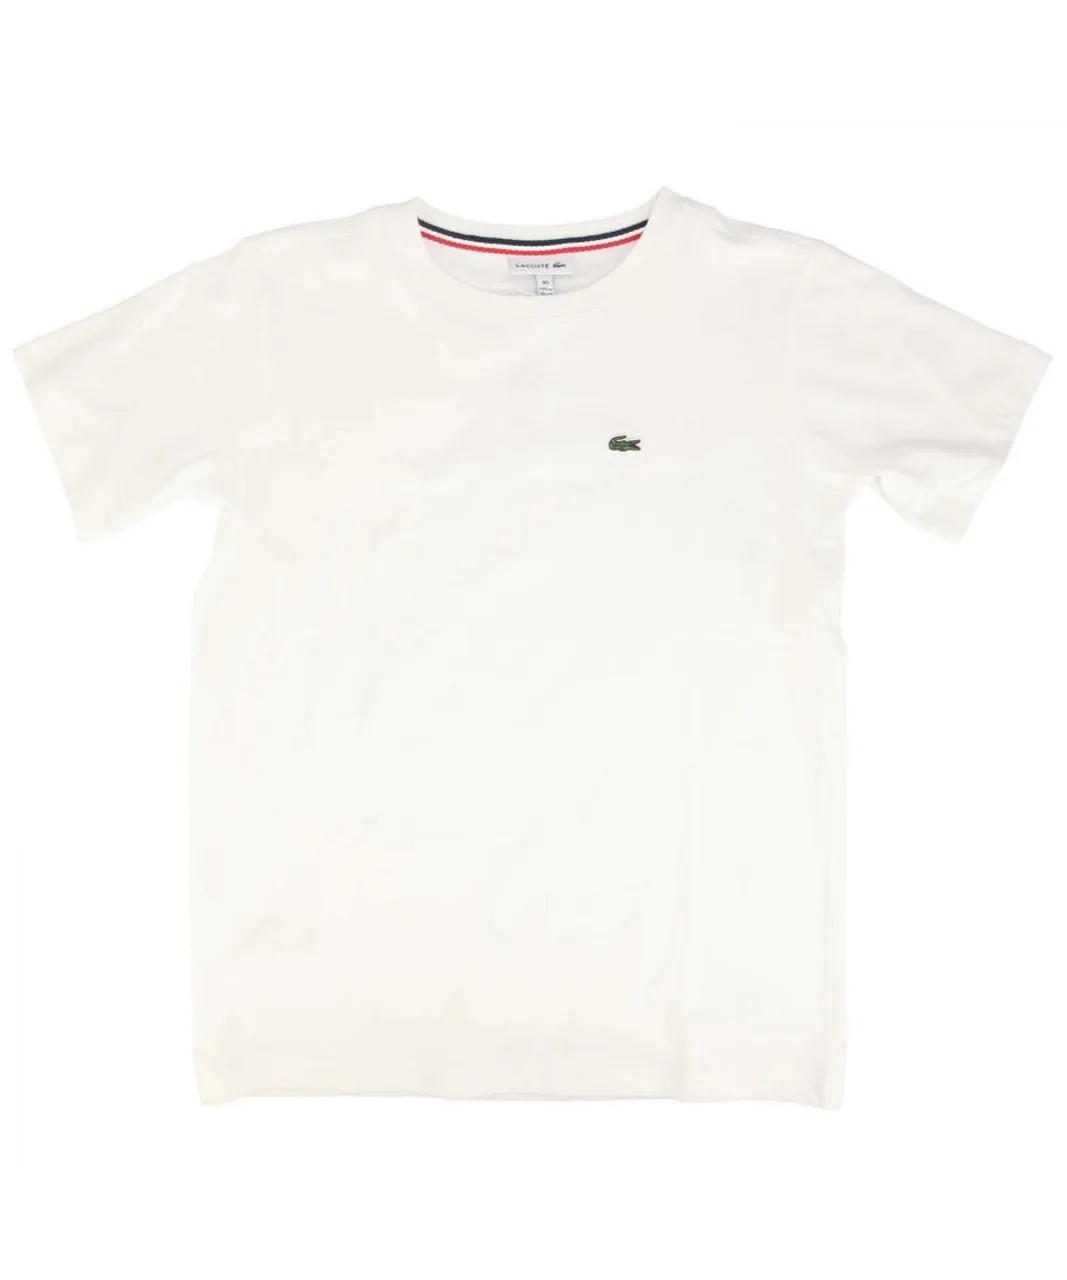 Lacoste Boys Boy's Crew Neck Cotton Jersey T-Shirt in White